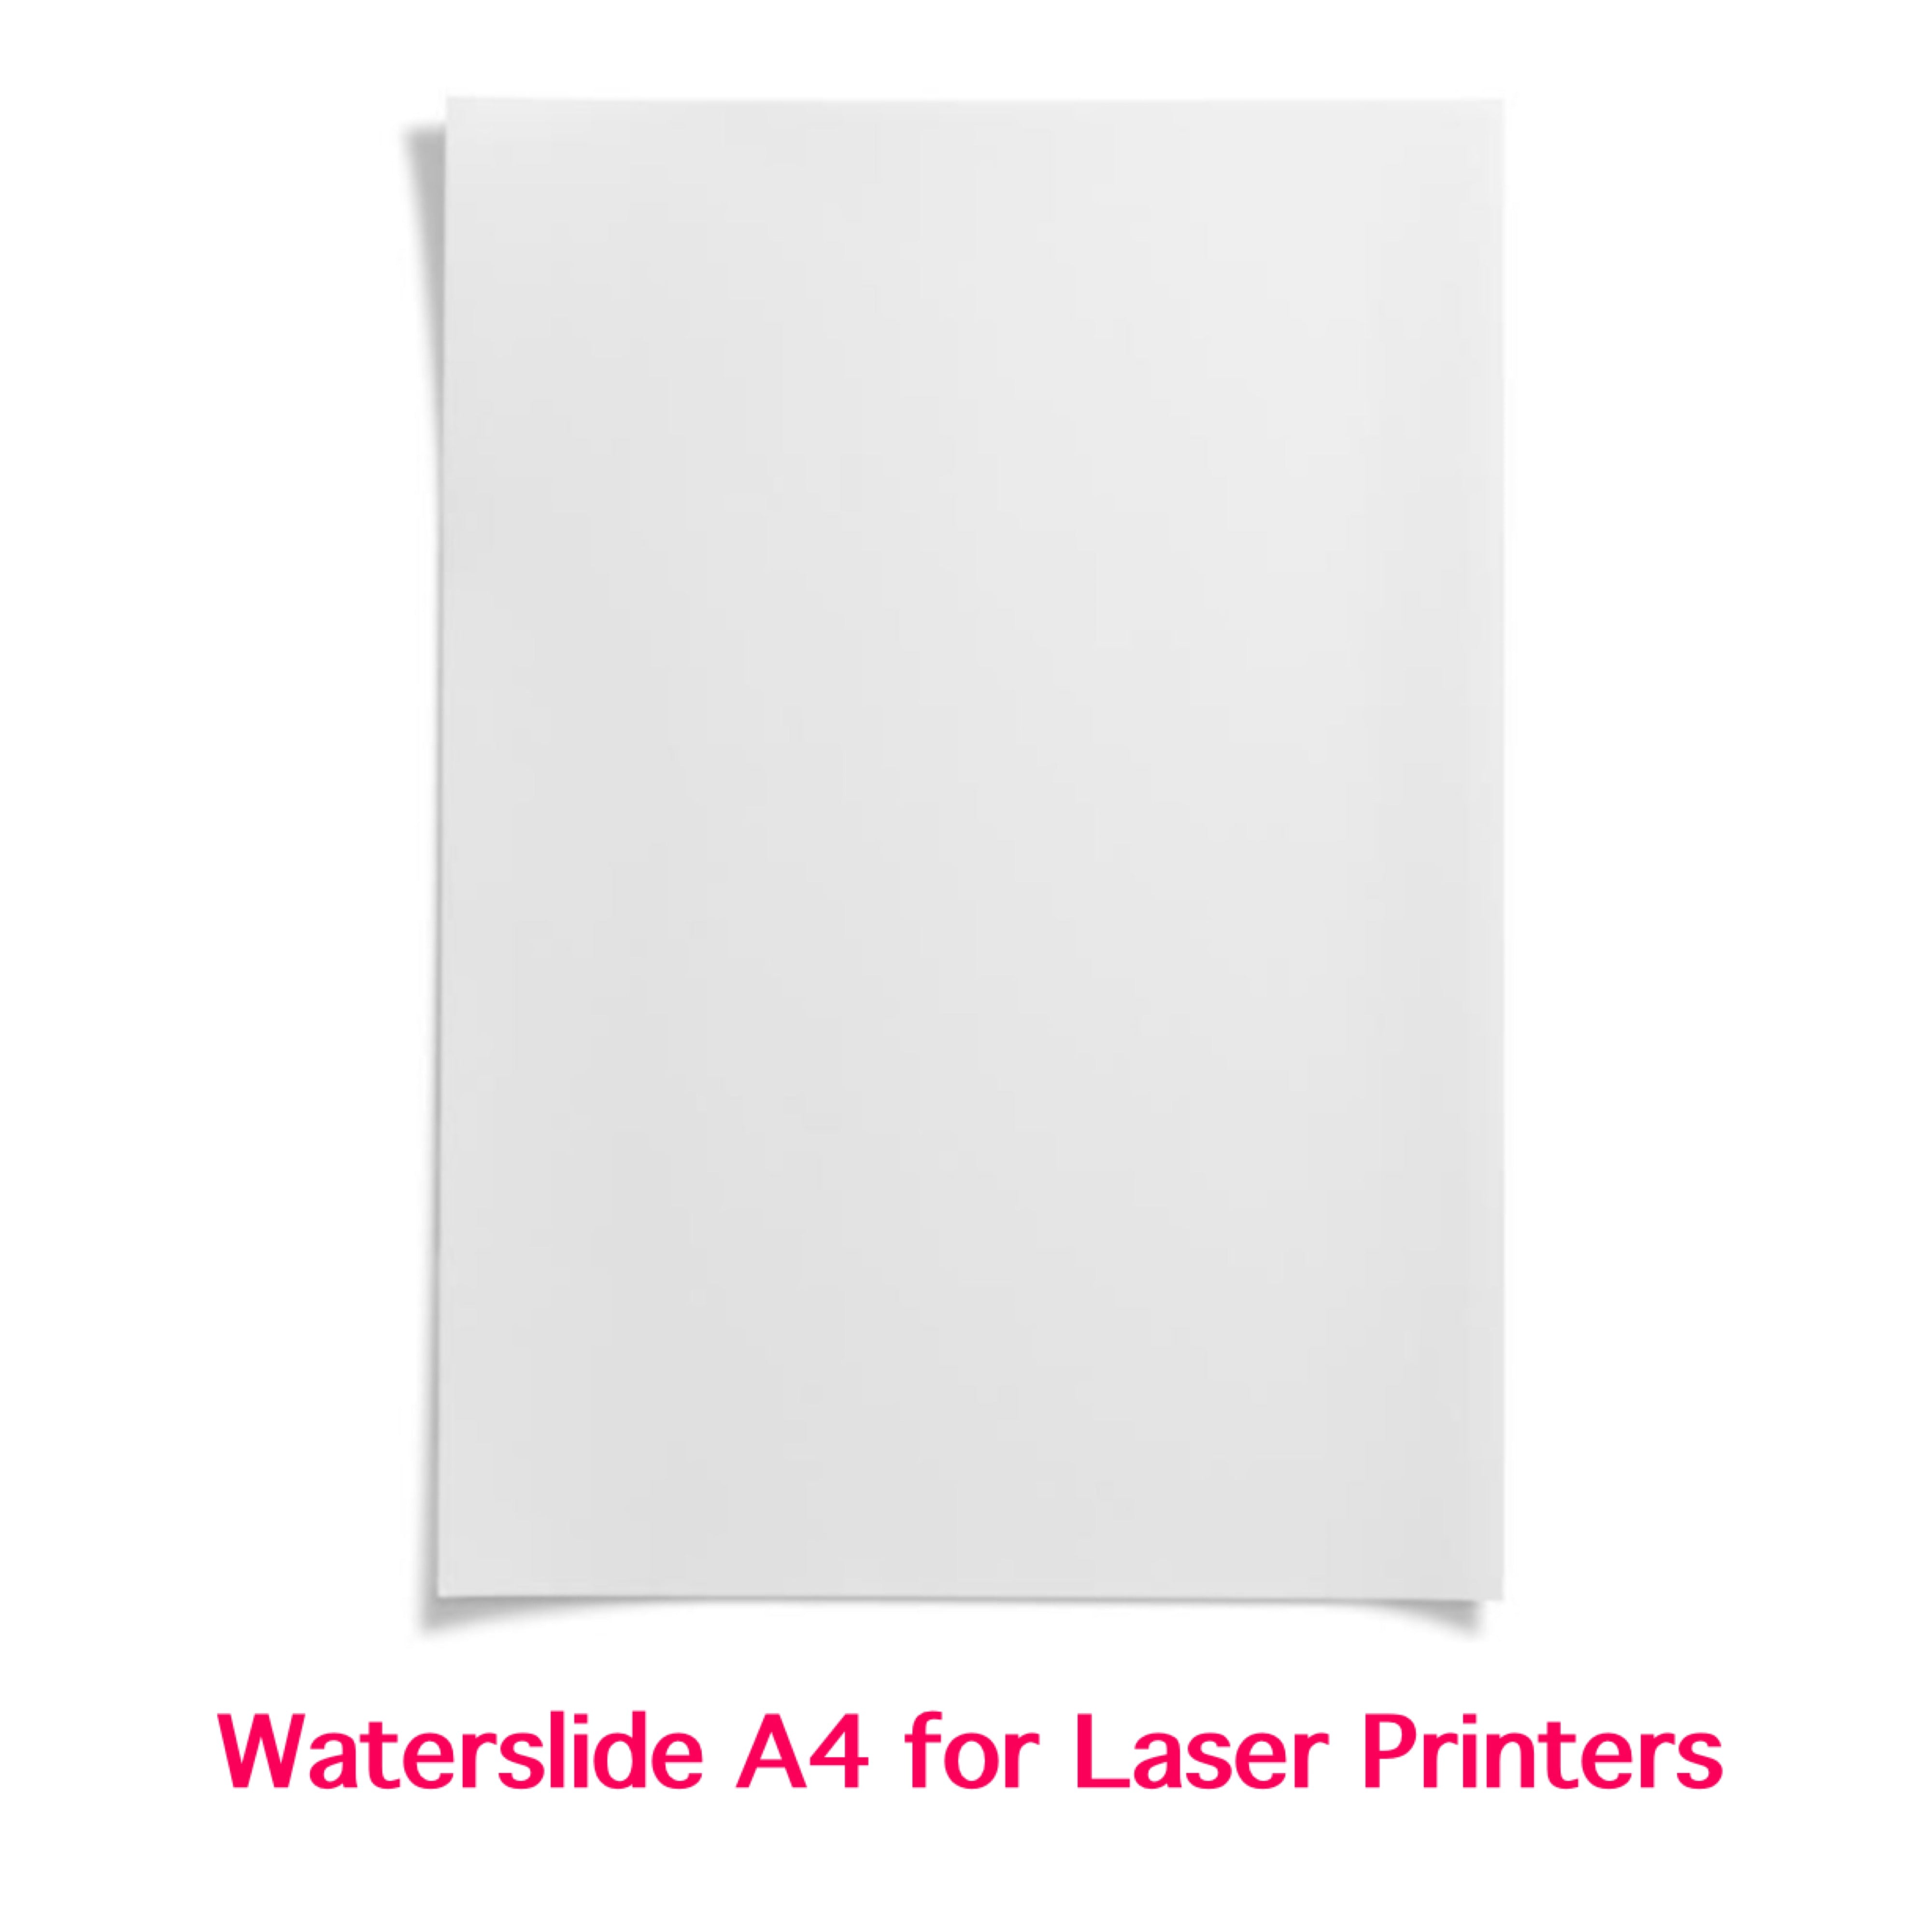 Waterslide Paper A4 for Laser Printers